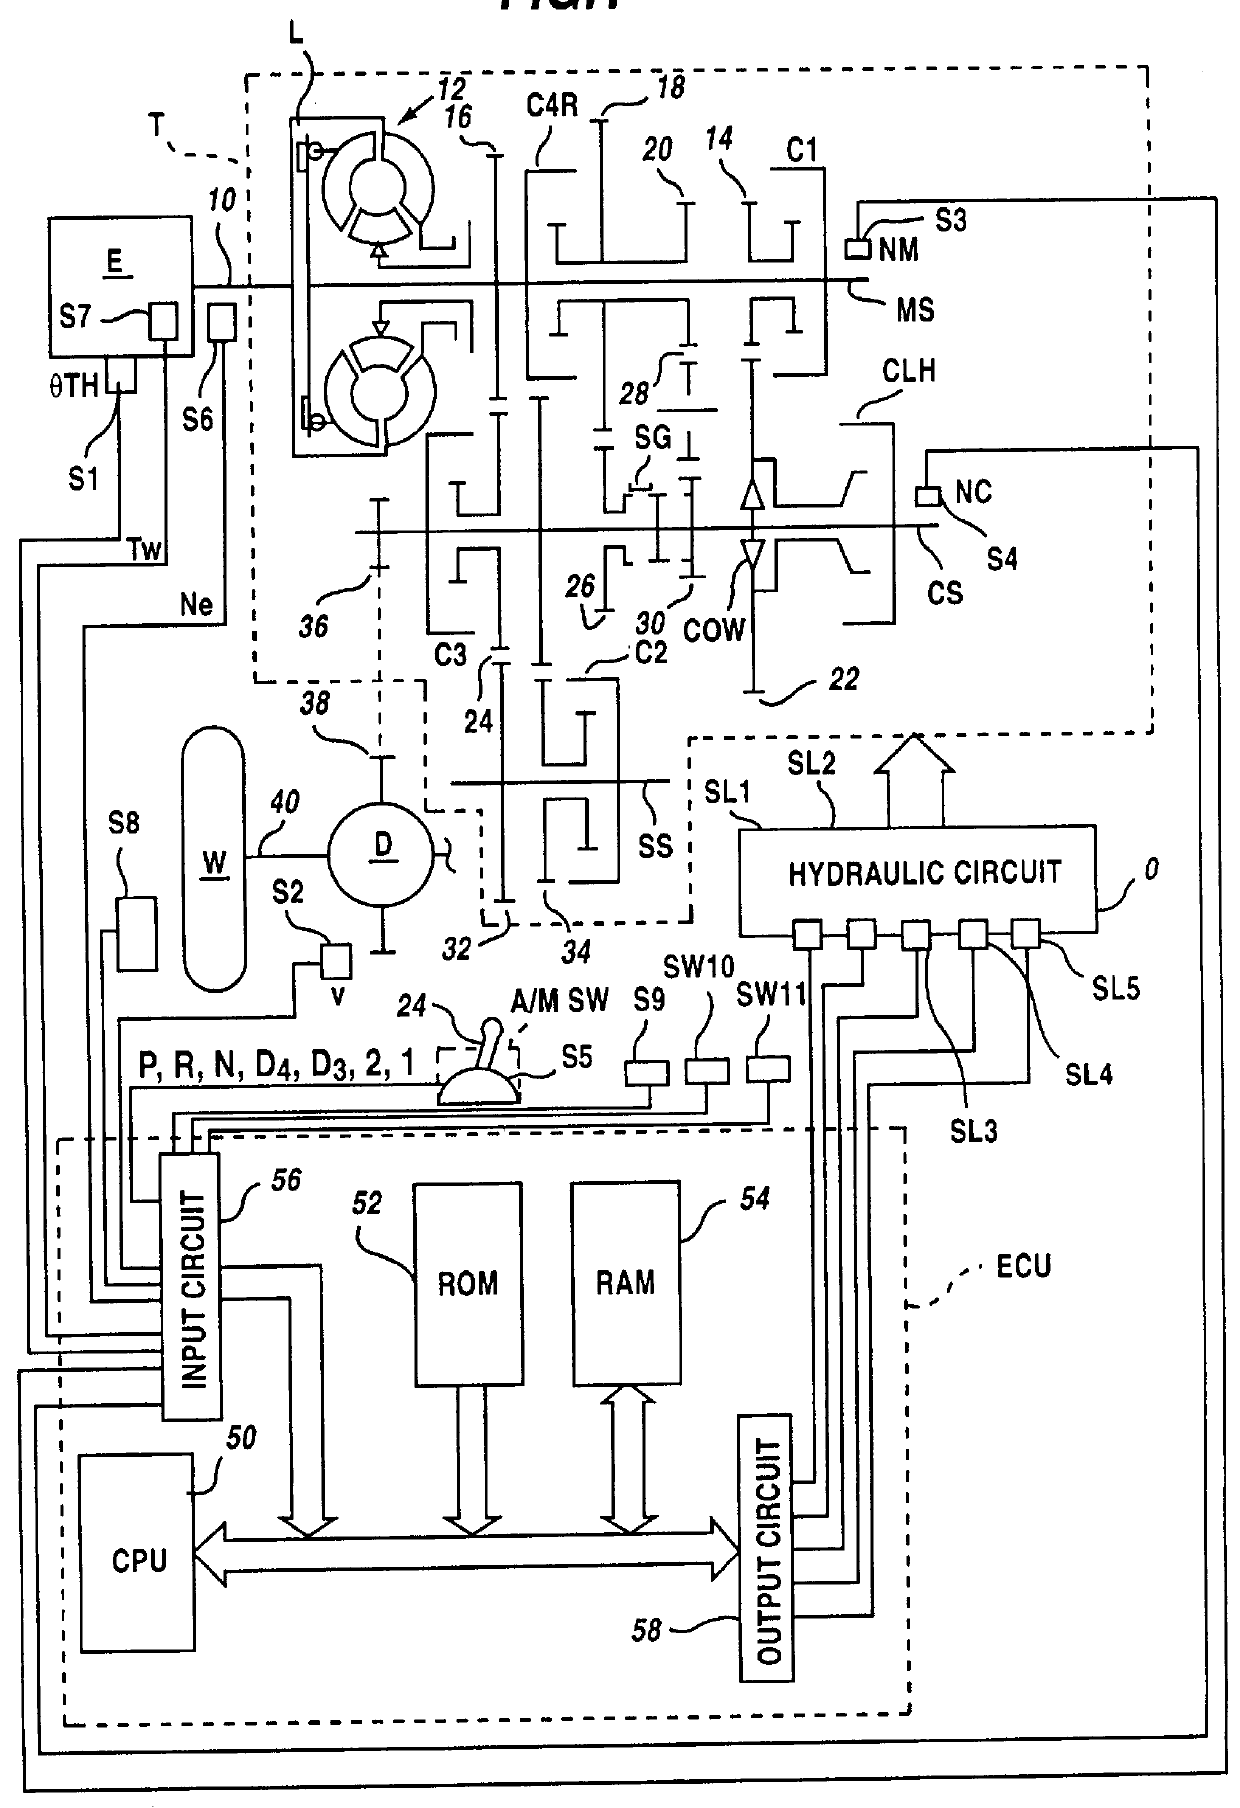 Control system for automatic vehicle transmission